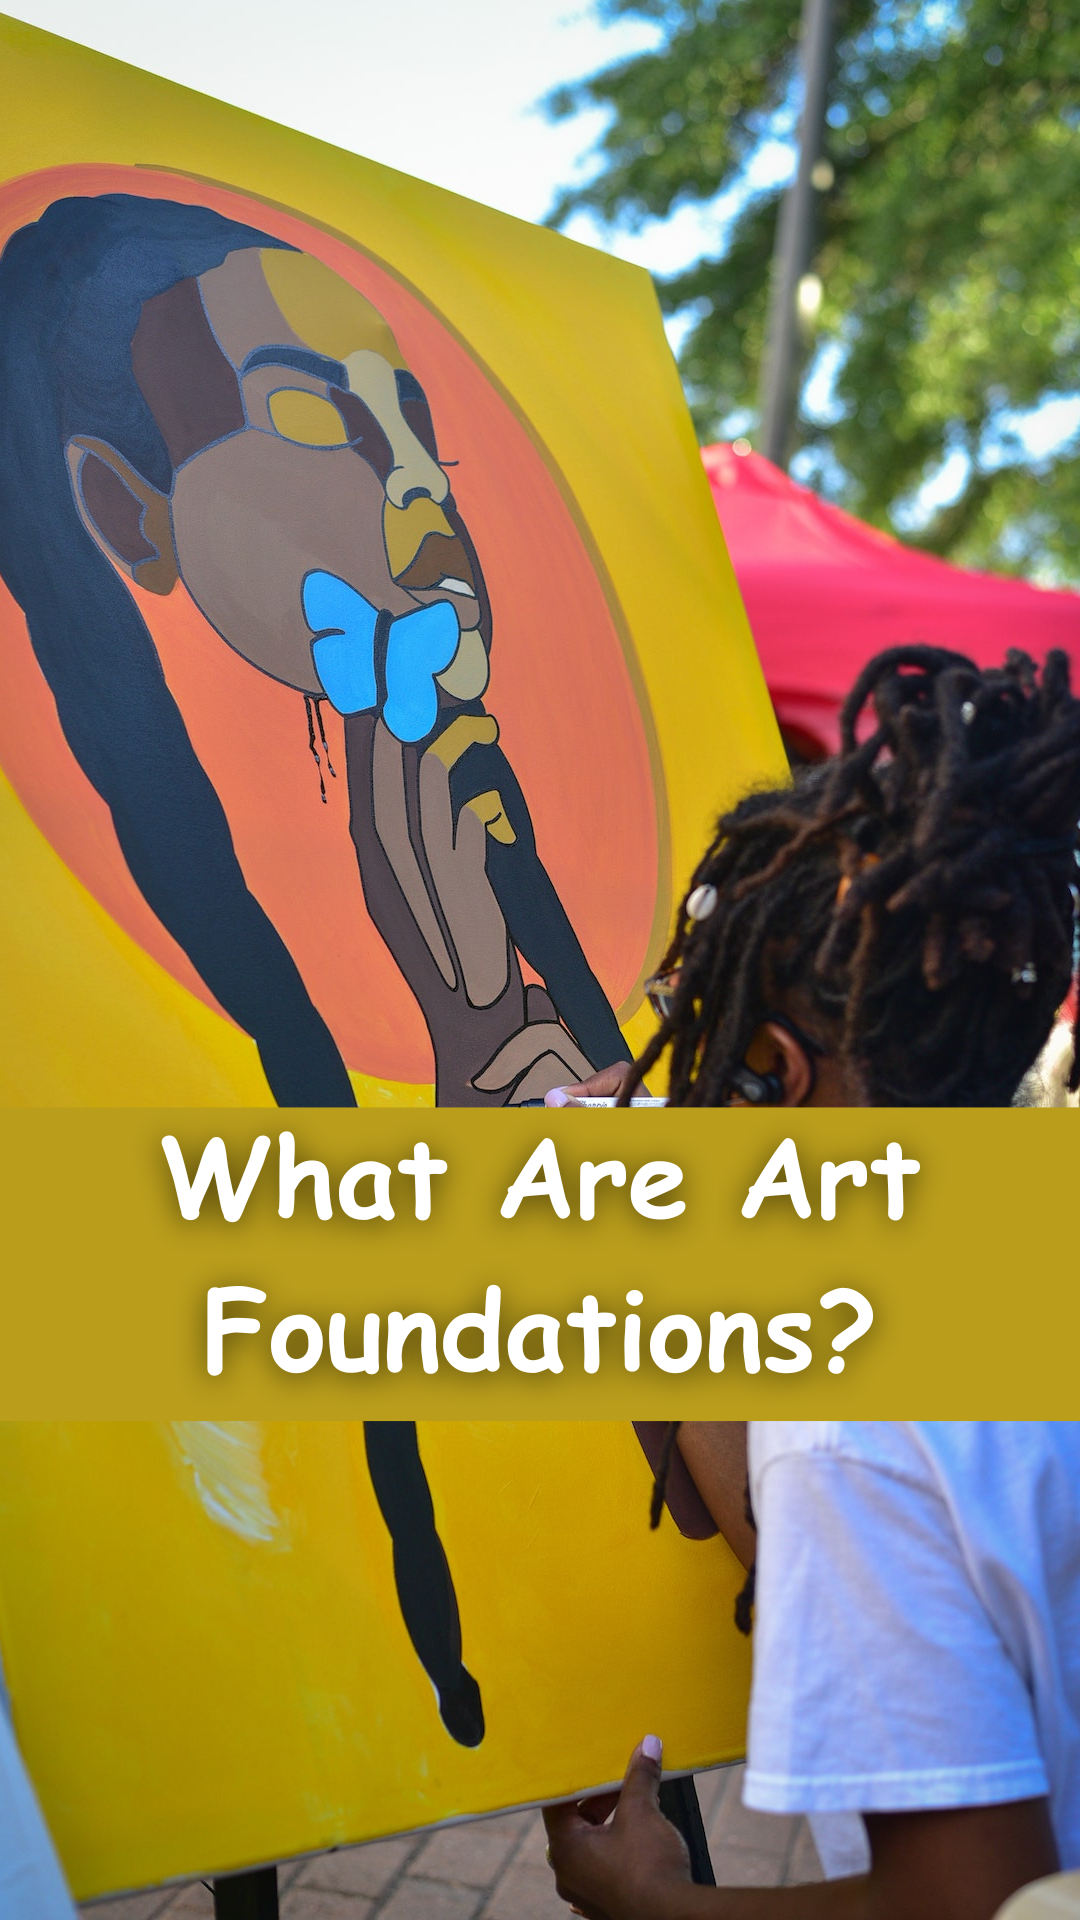 What Are Art Foundations?